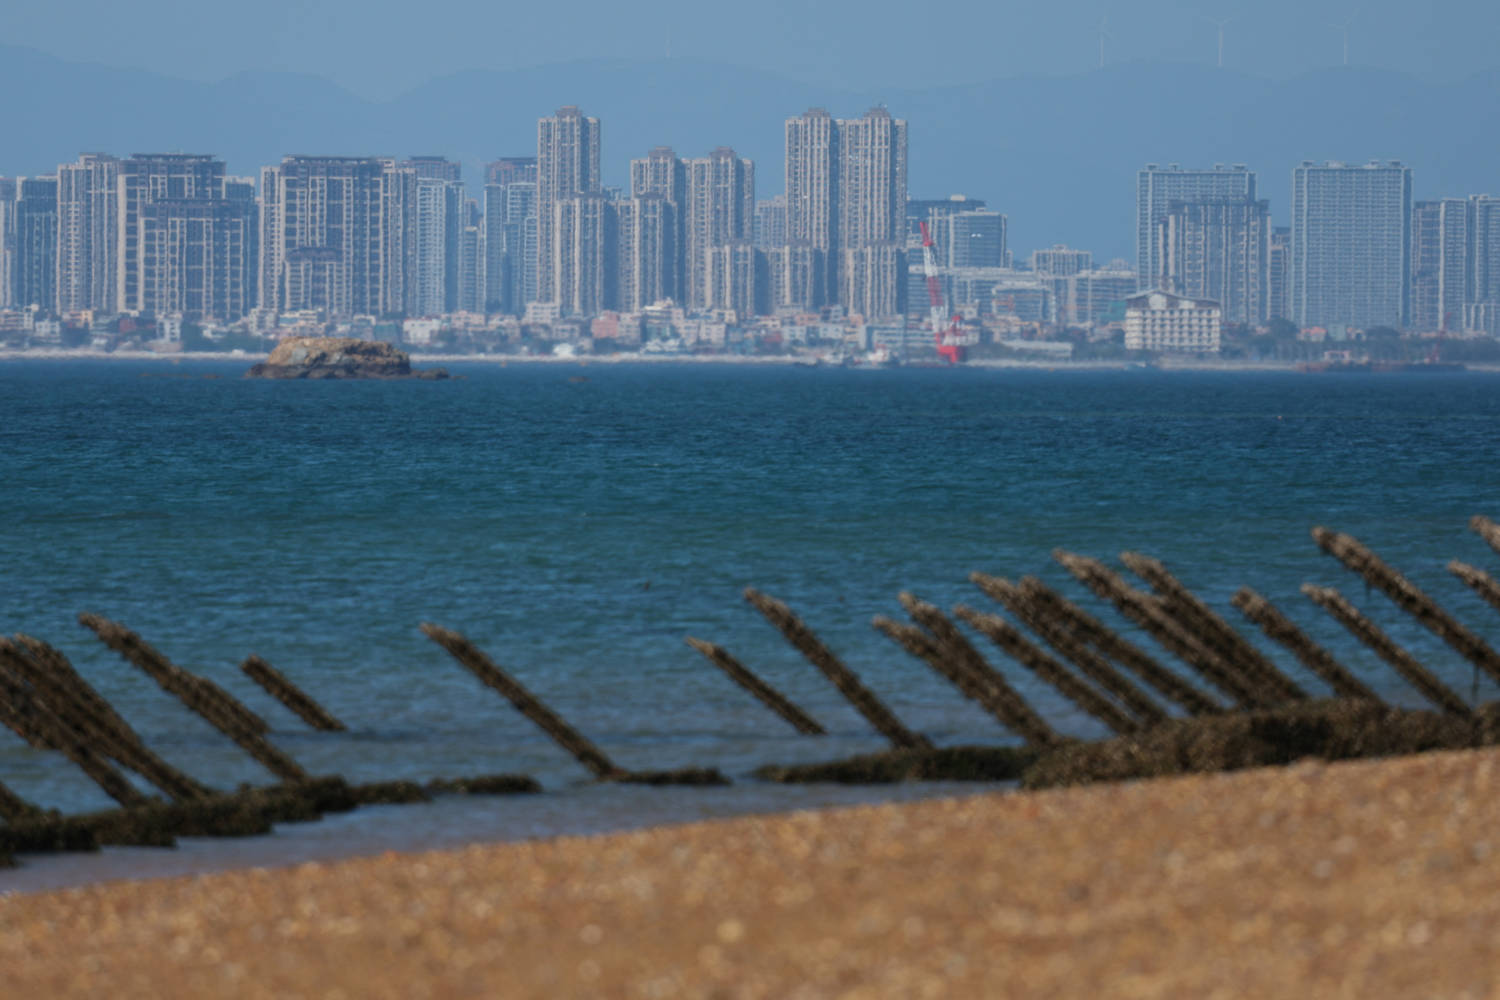 Anti Landing Barricades Are Pictured On The Beach, With China's Xiamen City In The Background, In Kinmen